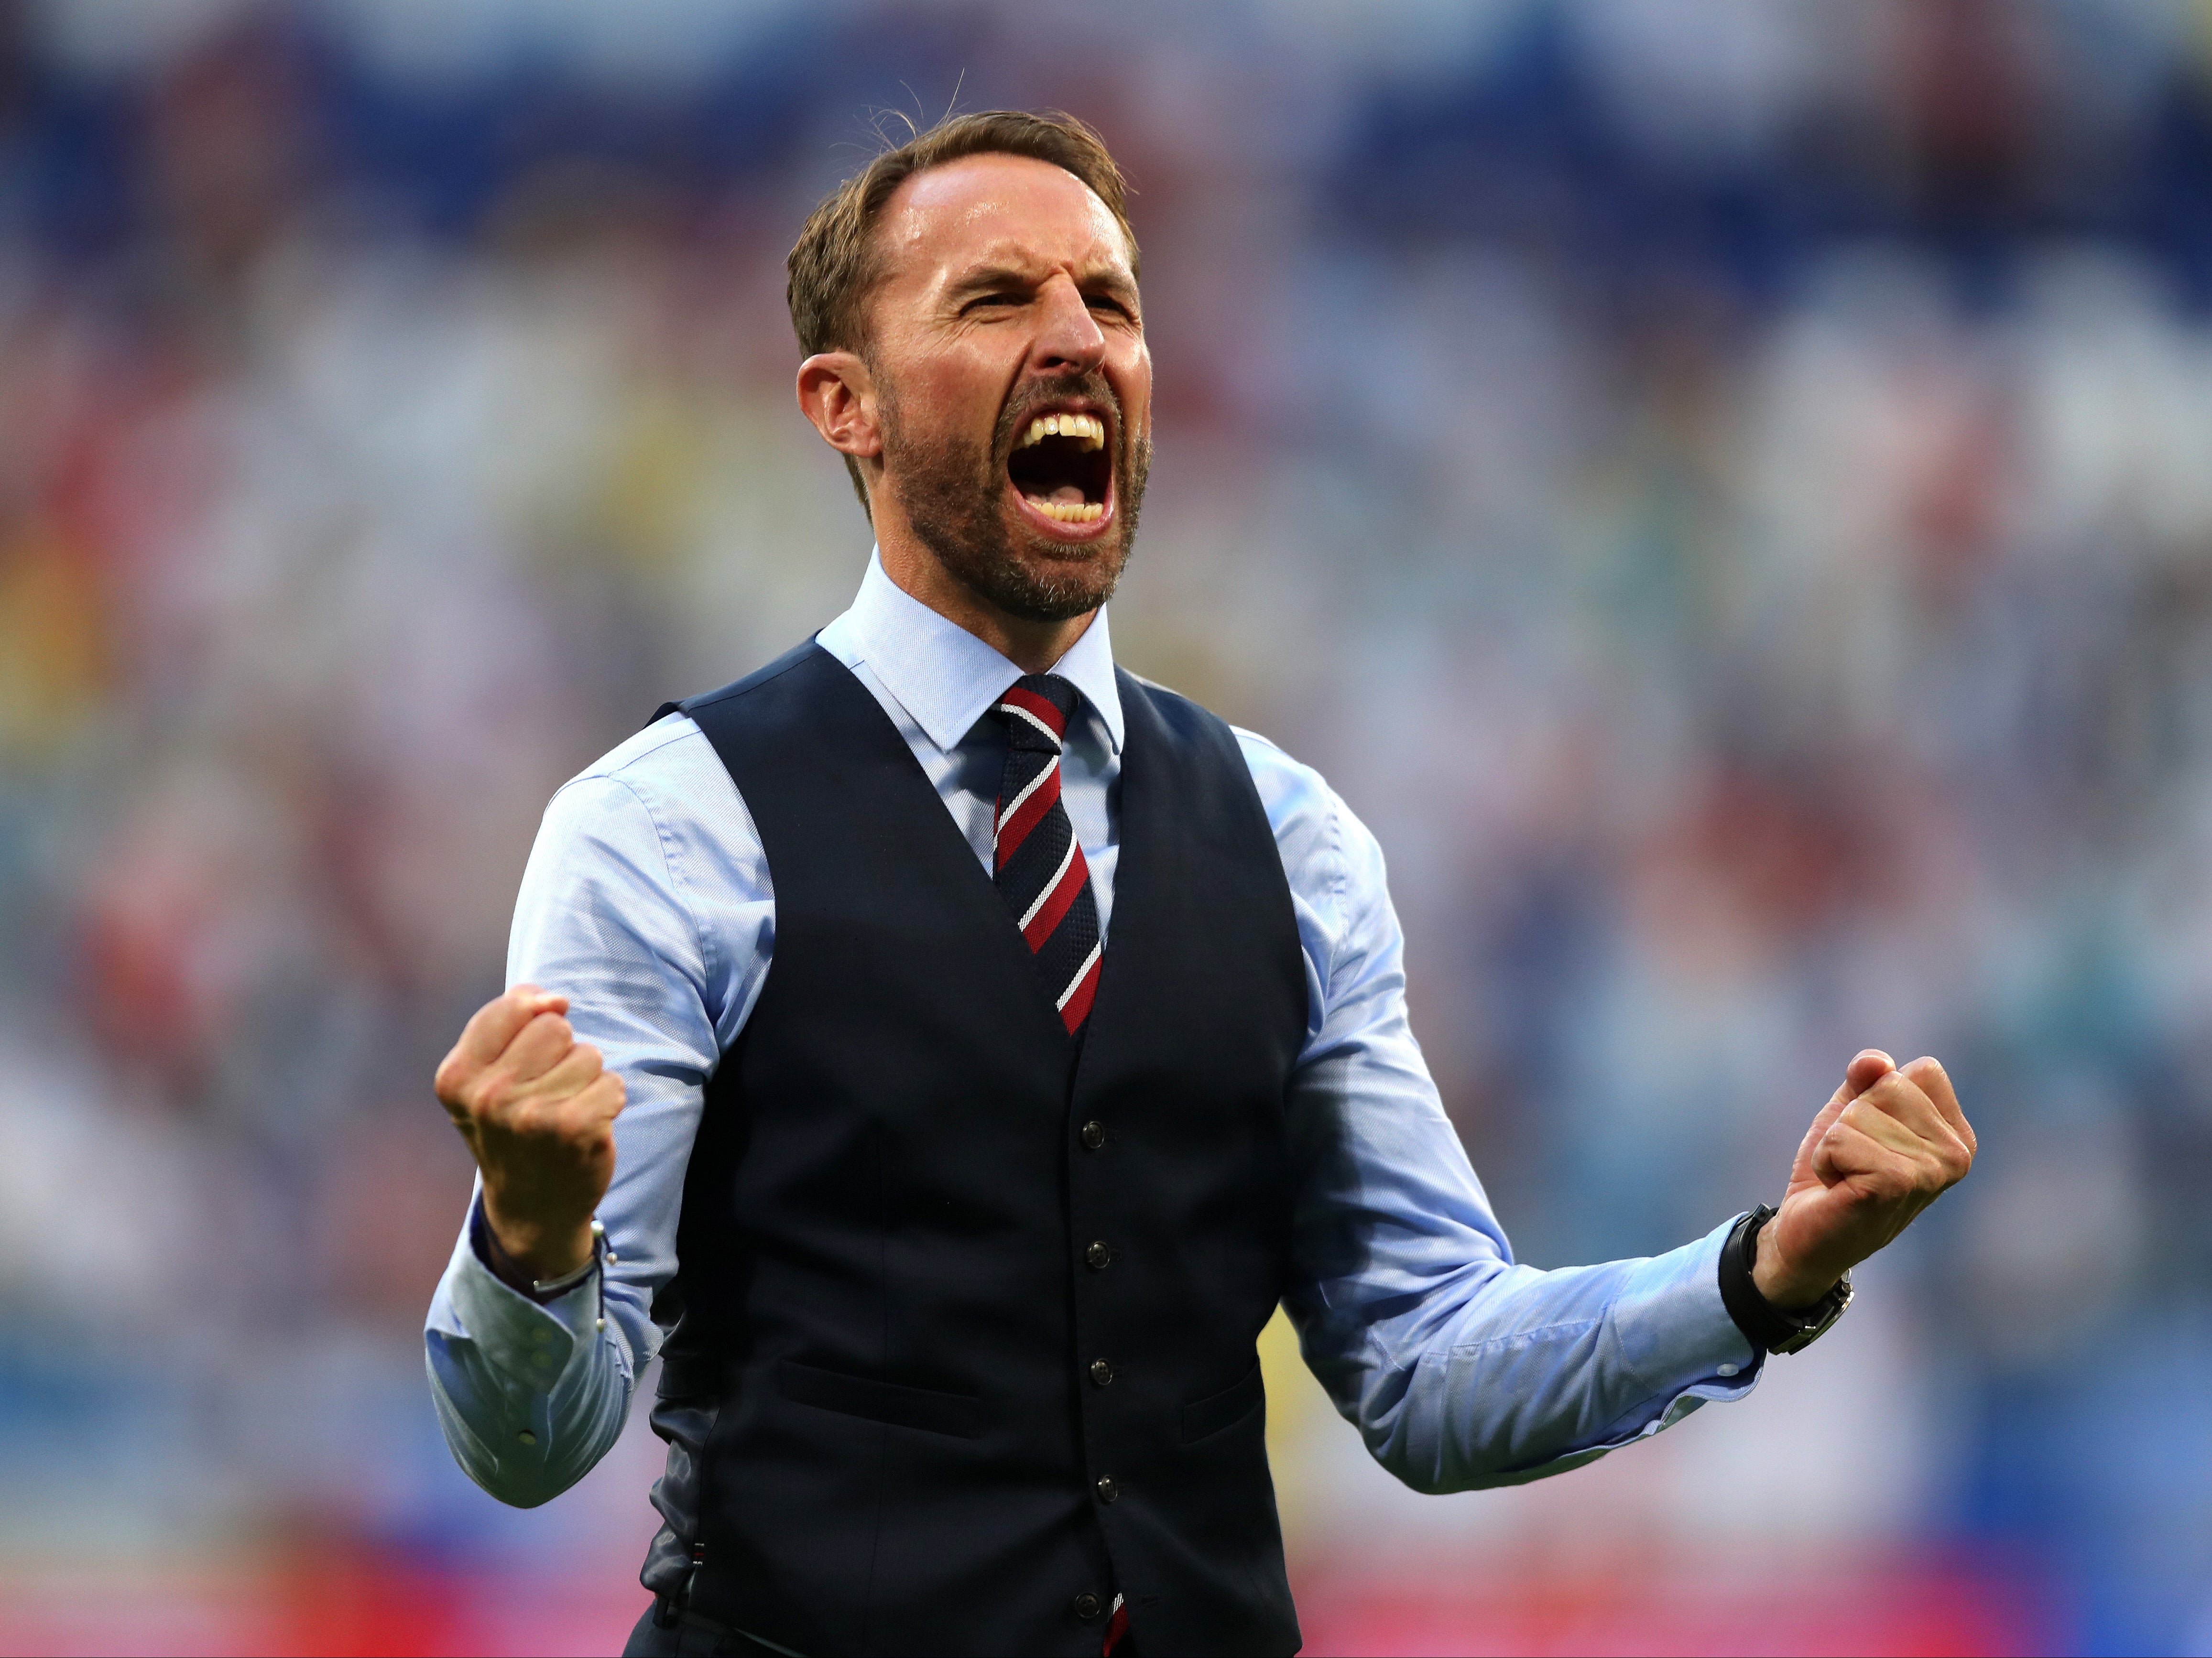 With hindsight, it is fair to say that, for what gaps Southgate had in experience, he has filled with character